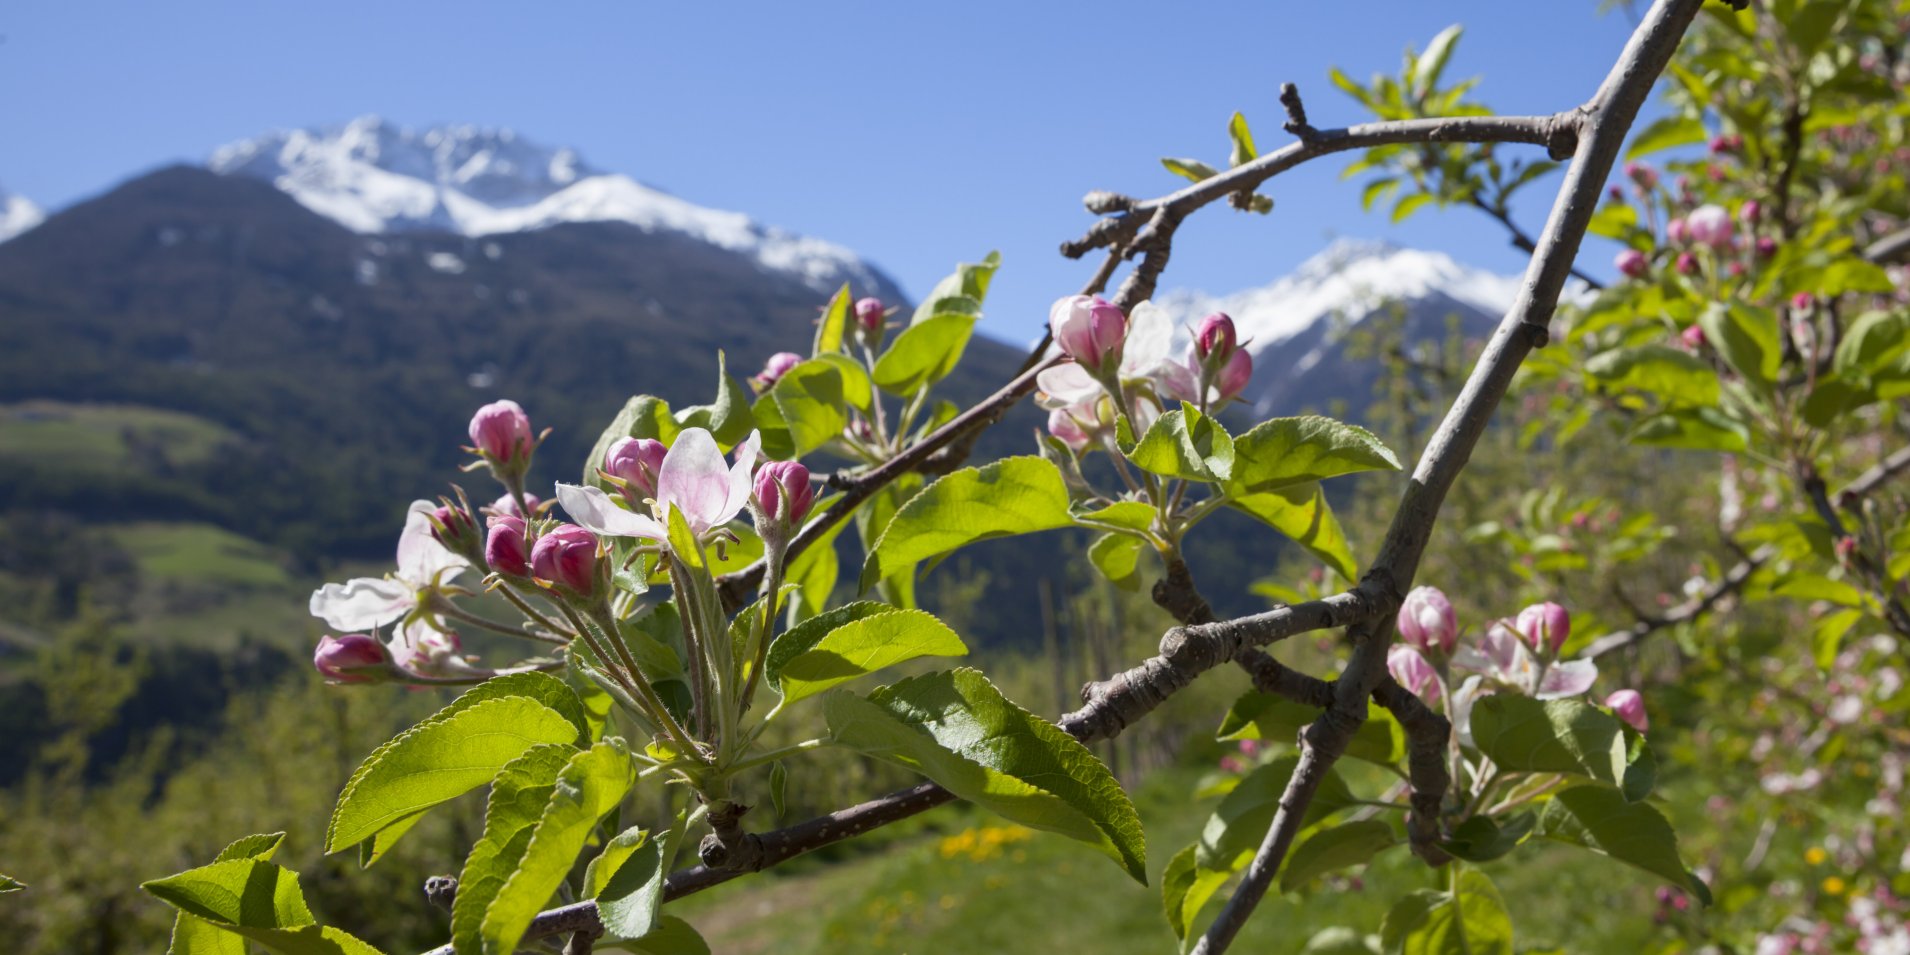 Apple blossom in the Vinschgau Valley